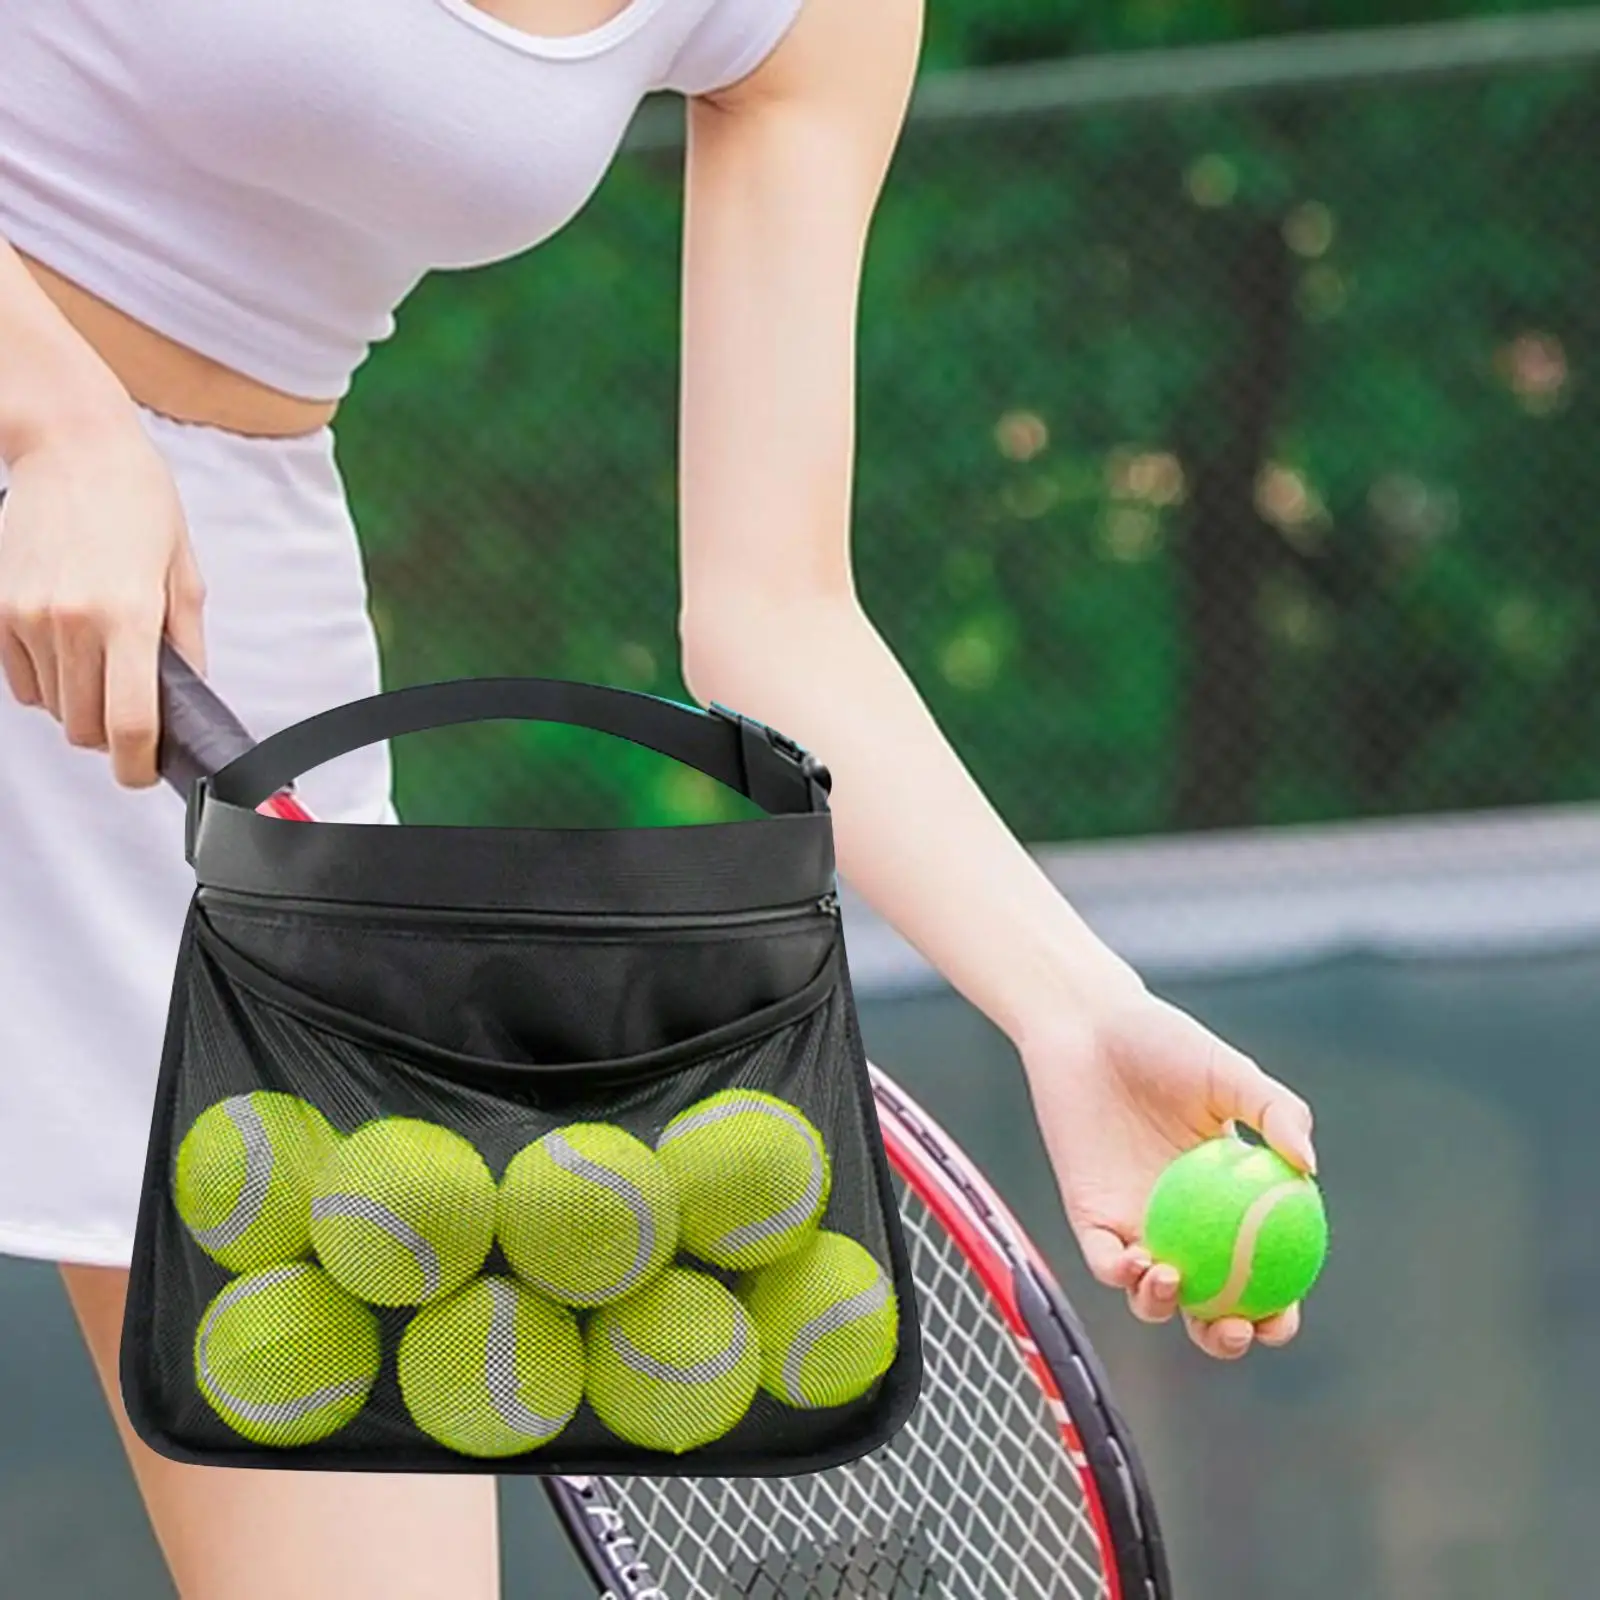 Black Tennis Ball Holder Carrier Gadgets Sports Accessory Tennis Ball Holder Mesh Storage Bag for Storing Balls and Phones